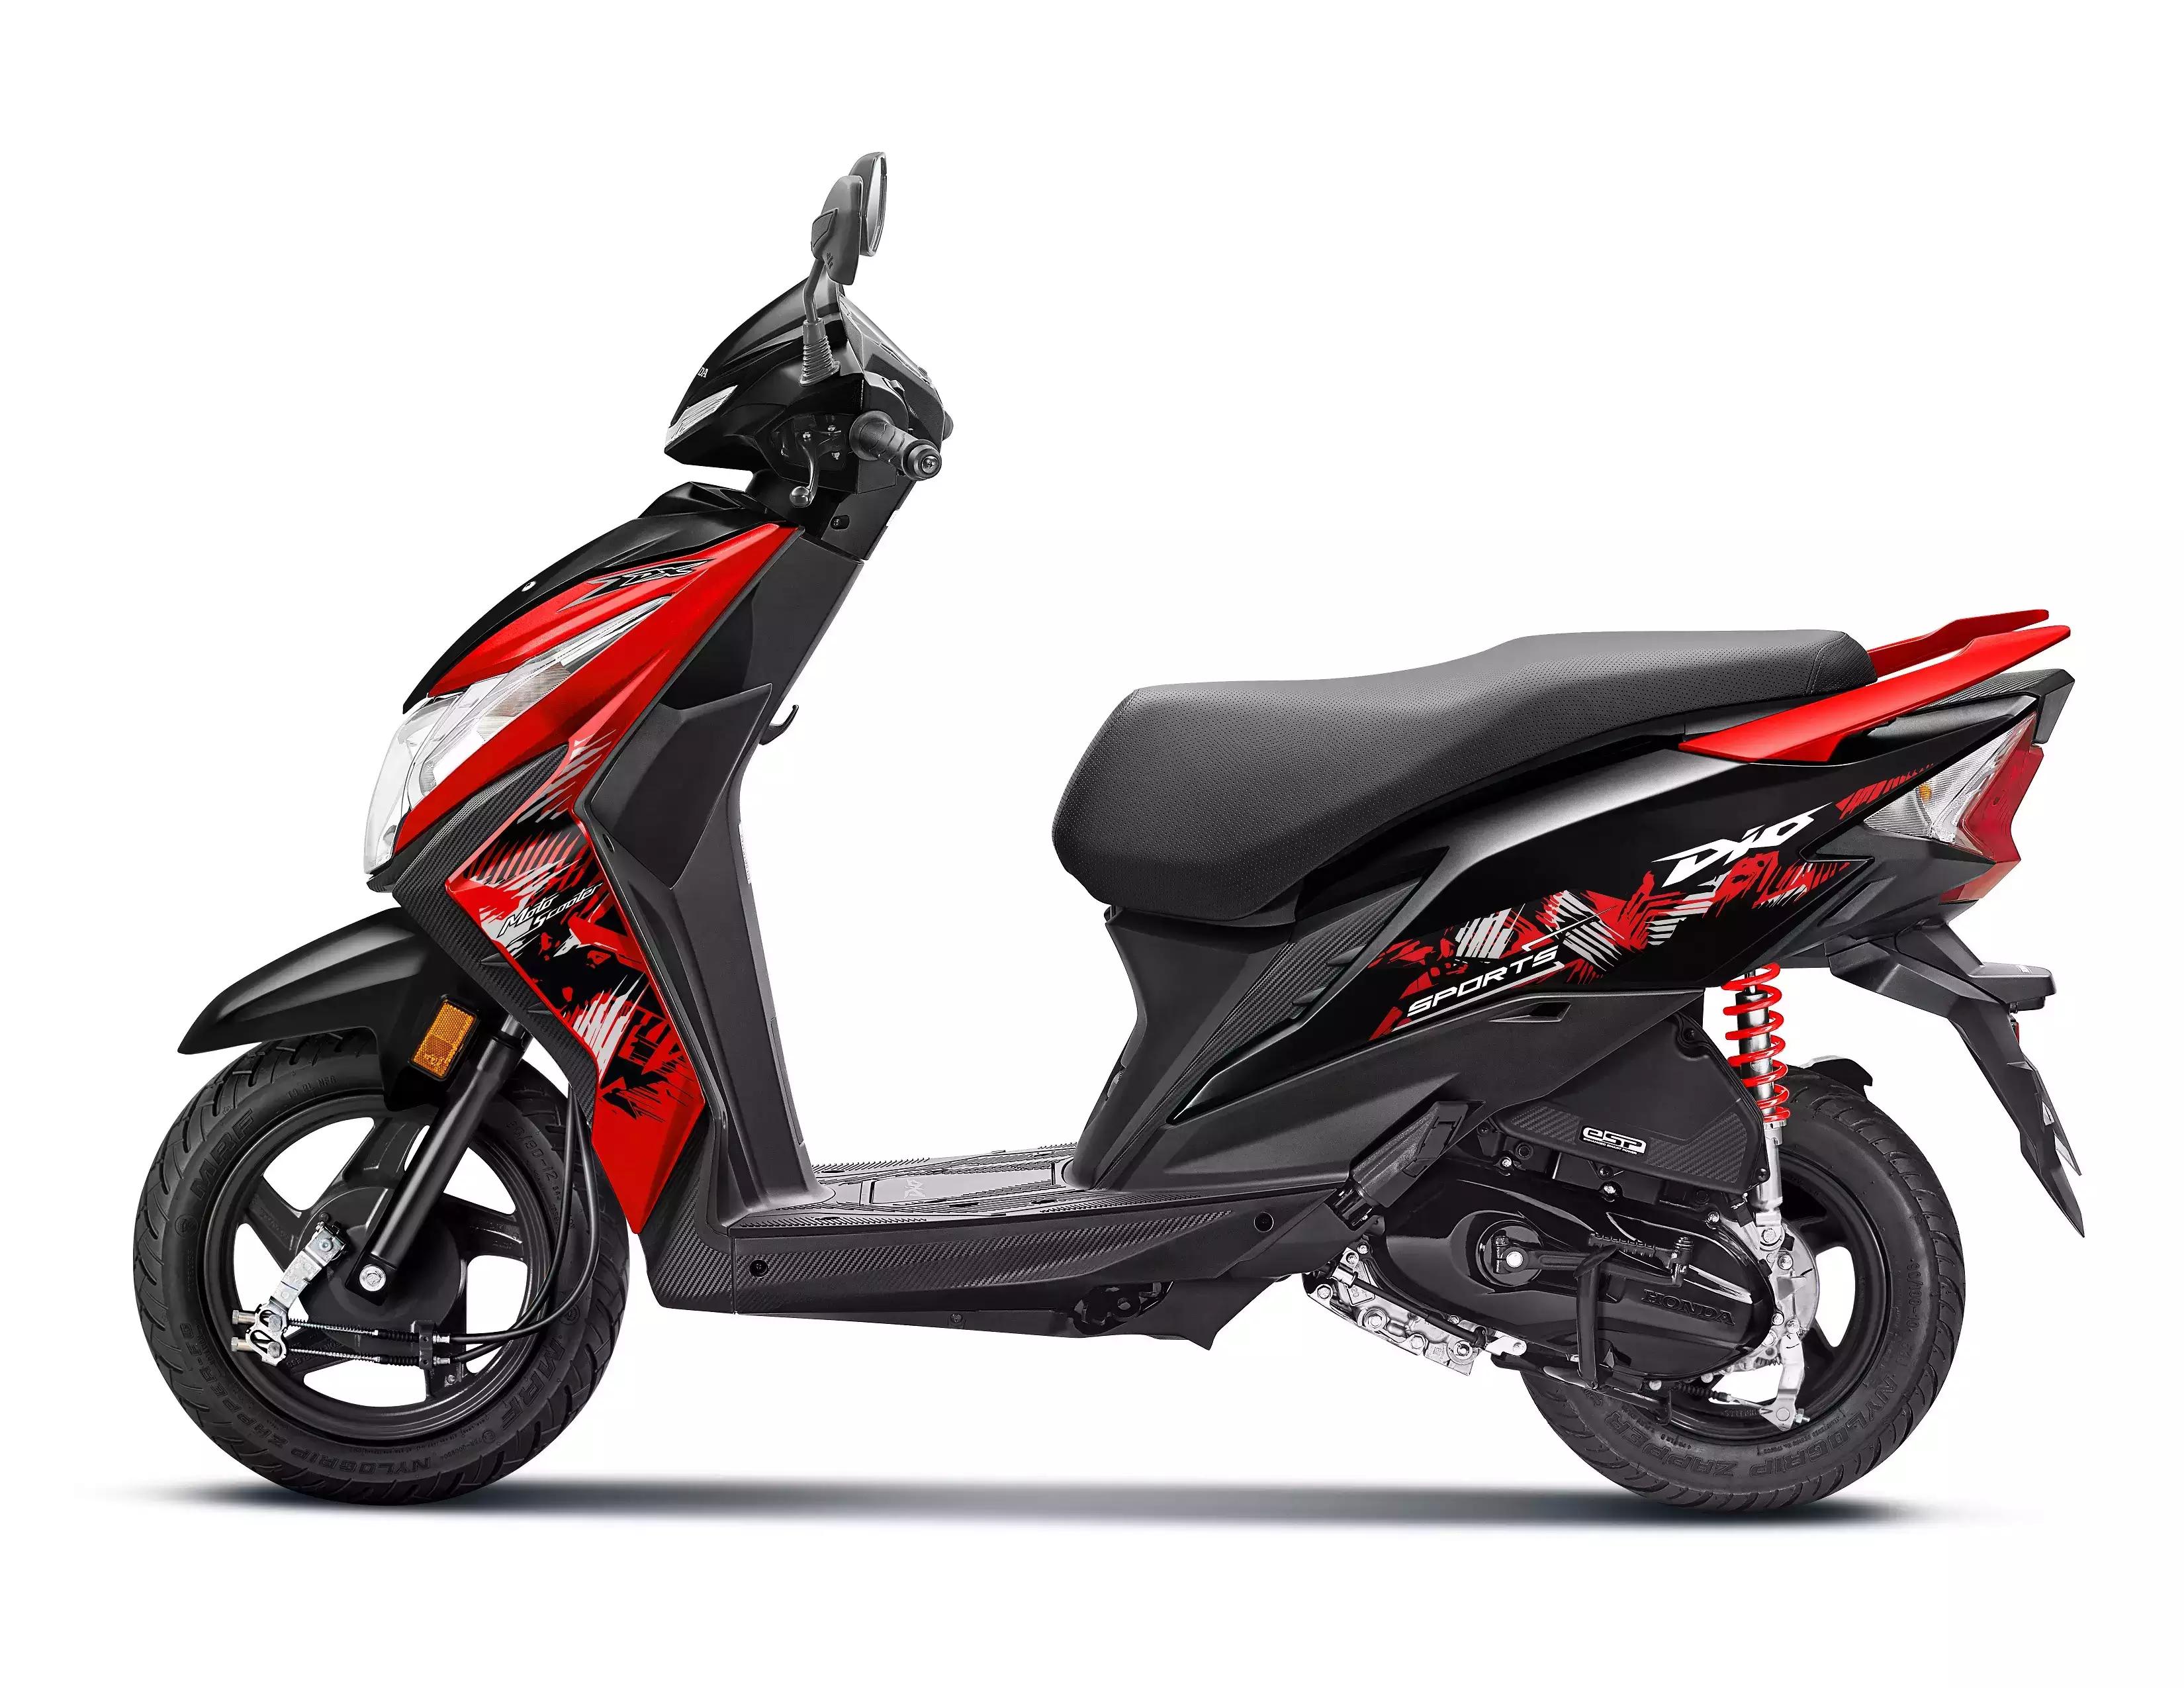 Honda Dio Sports Scooter Limited Edition Priced Rs 68,317 Launched